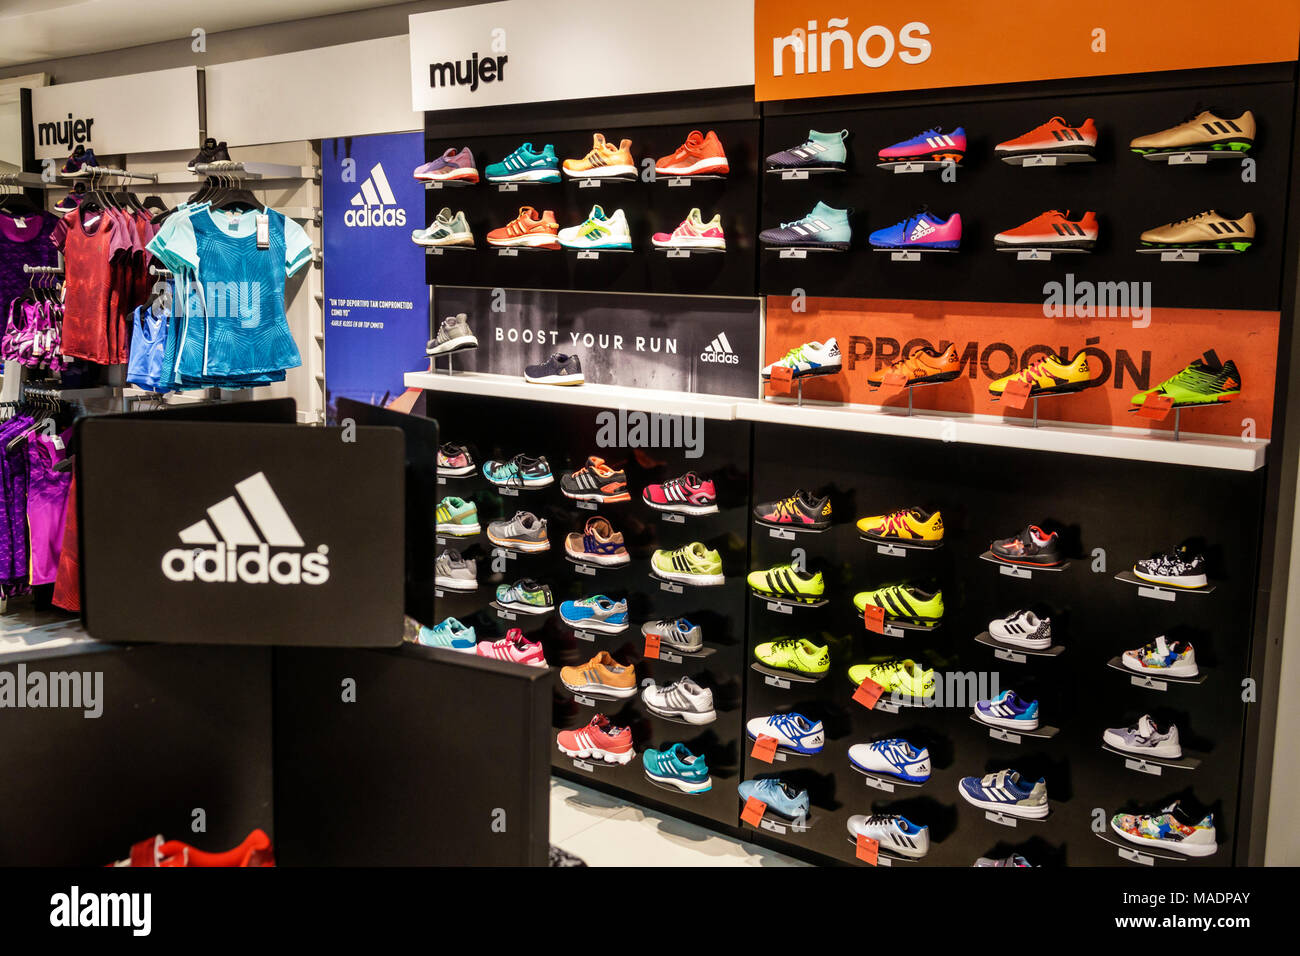 adidas outlet monza orari,Free delivery,www.wearpumps.com